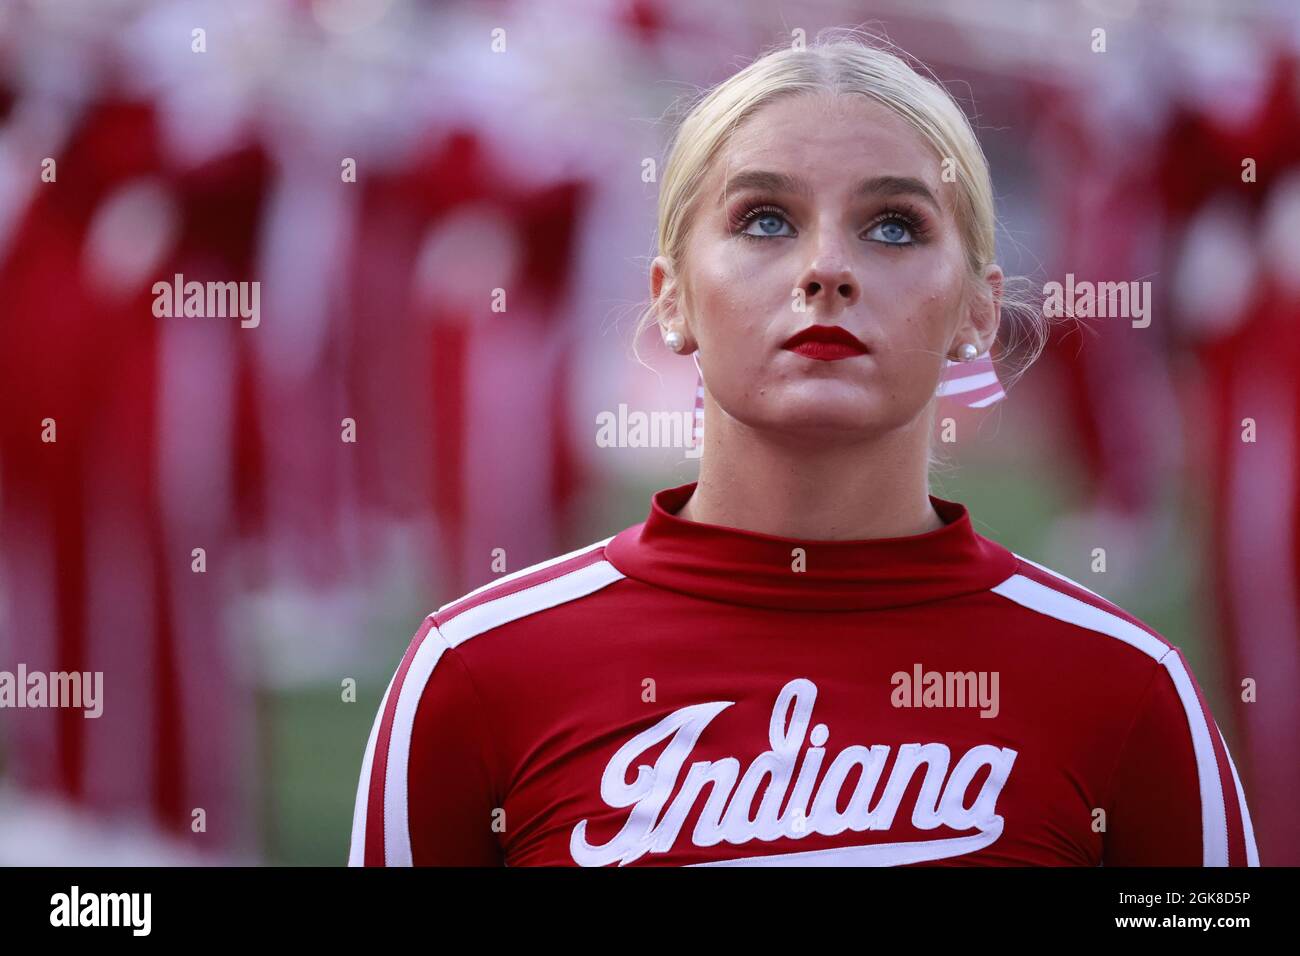 BLOOMINGTON, UNITED STATES - 2021/09/11: Indiana University cheerleaders lead a cheer before IU plays against Idaho during an NCAA football game on September 11, 2021 at Memorial Stadium in Bloomington, Ind. The Hoosiers beat the Vandals 56-14. Stock Photo